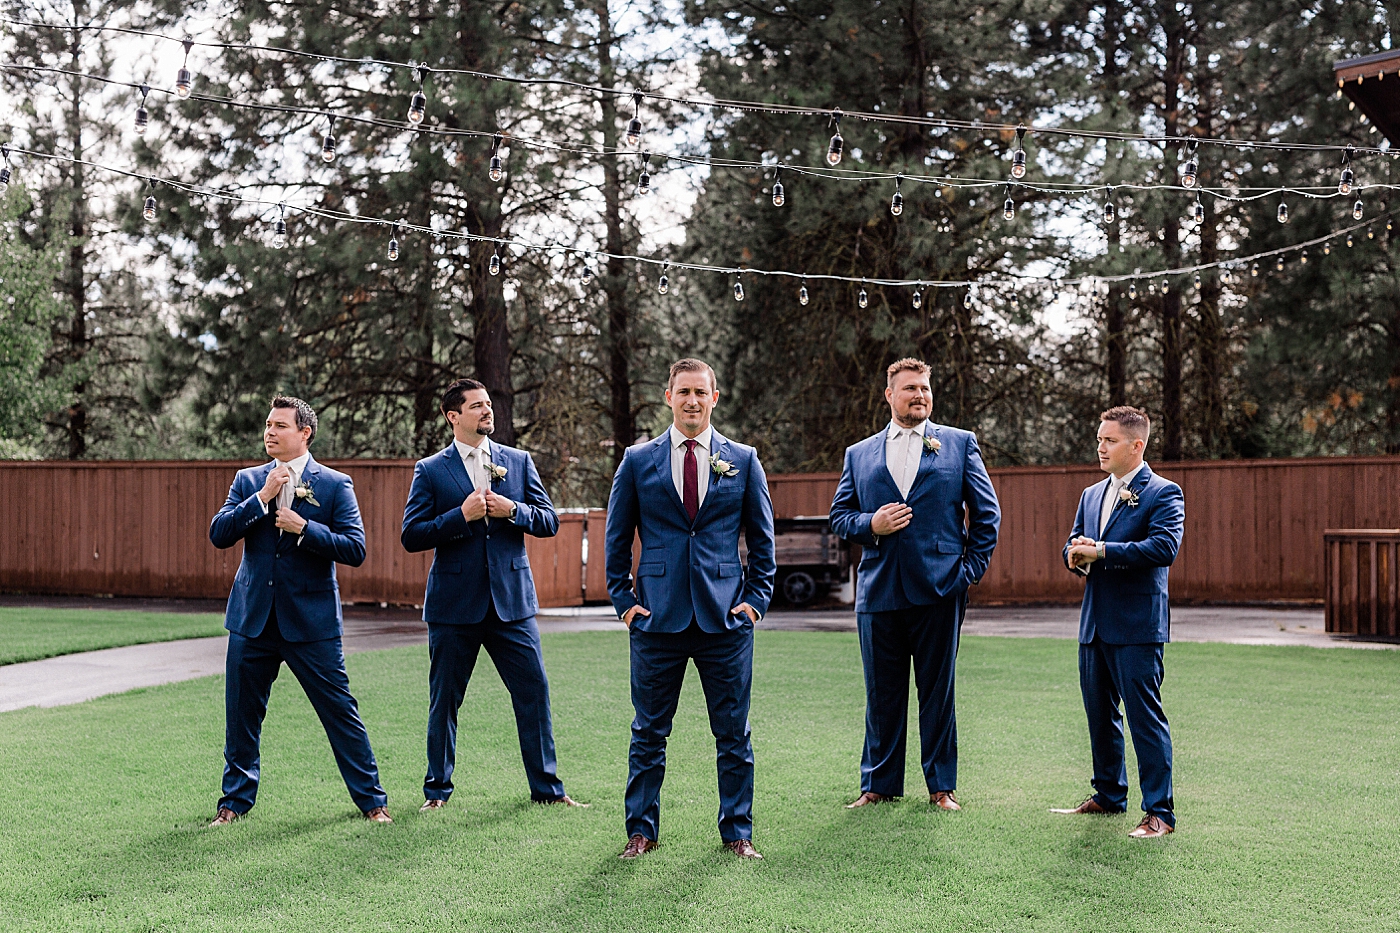 Groom and groomsmen photos at Swiftwater Cellars Wedding. Photographed by Cle Elum Wedding Photographer, Megan Montalvo Photography. 